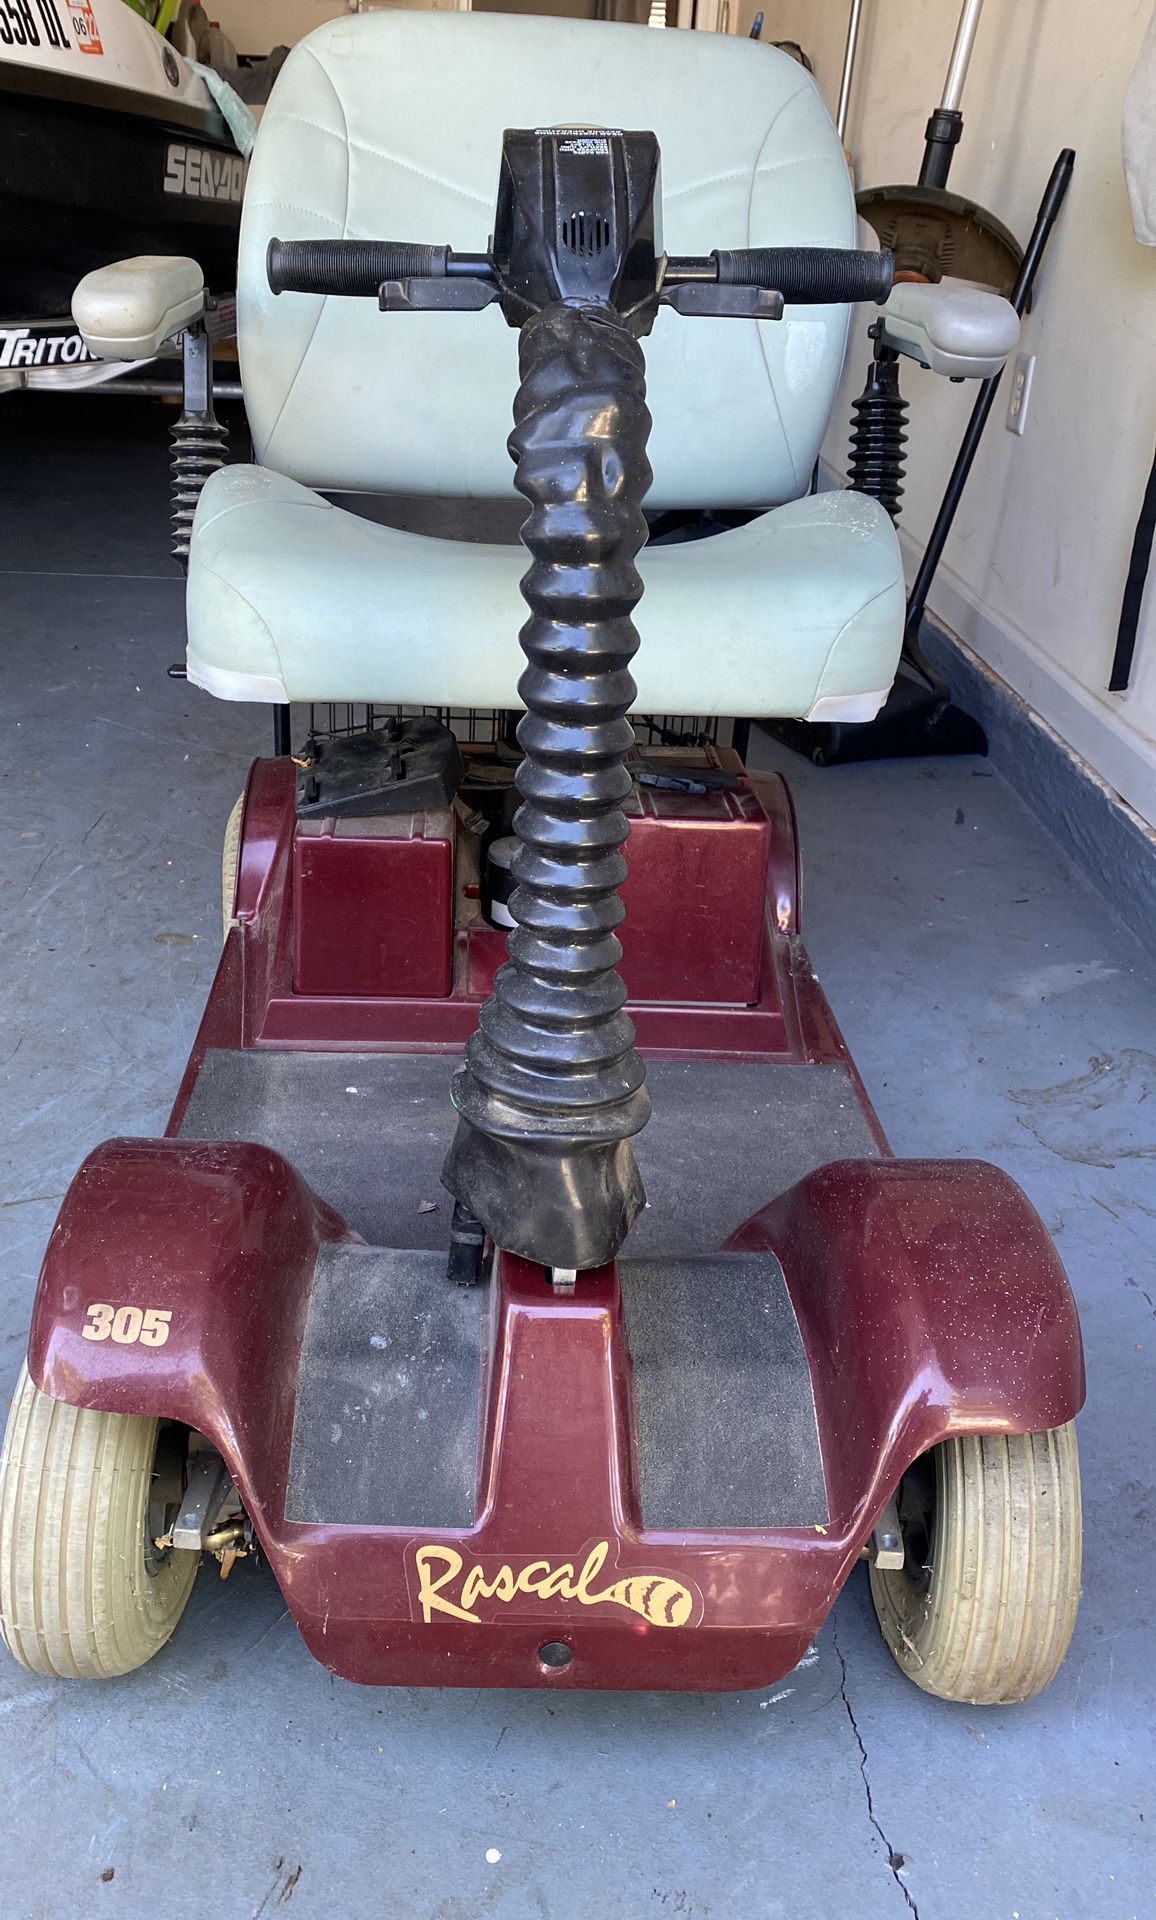 Electric scooter rascal 305 for for Sale in Greenville, SC - OfferUp